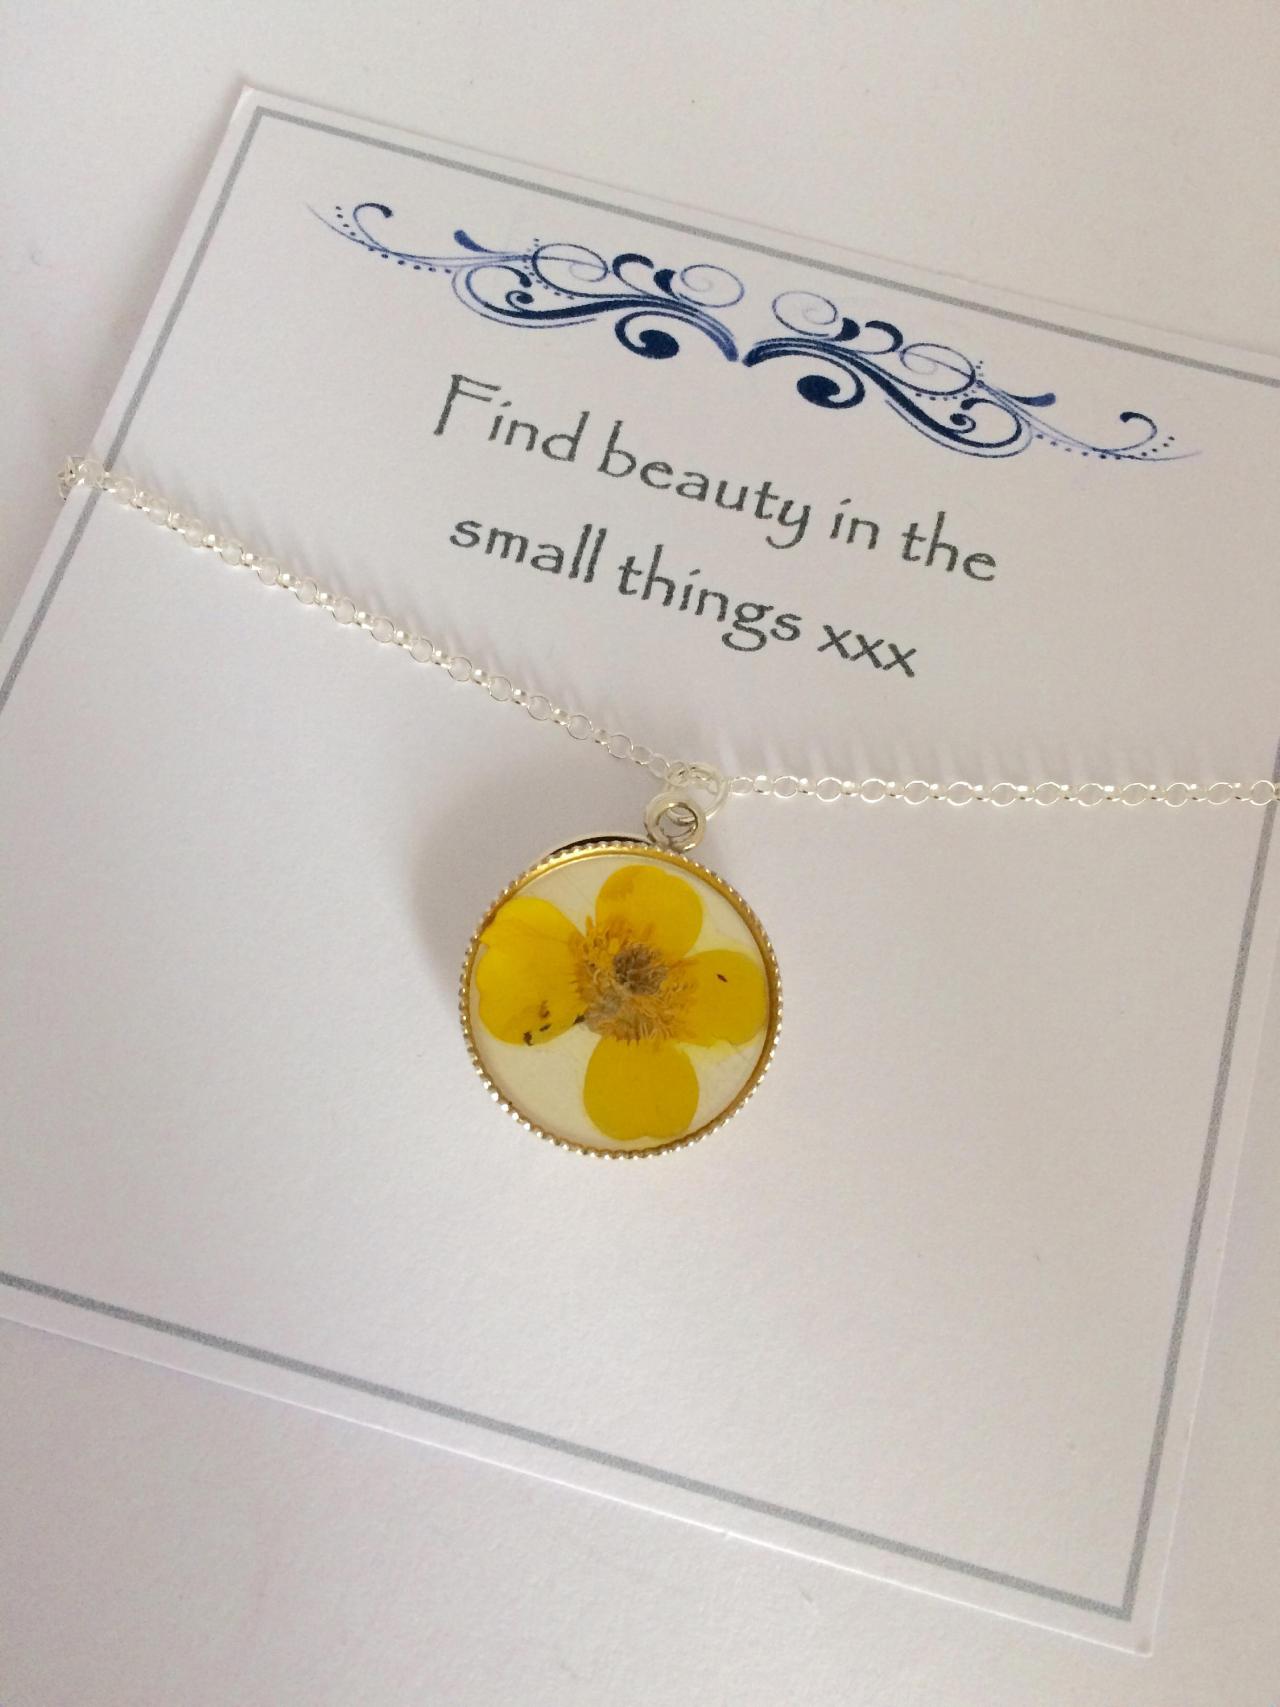 Memories Of Buttercups In The Garden - A Real Dainty Buttercup Memory Sterling Silver Necklace